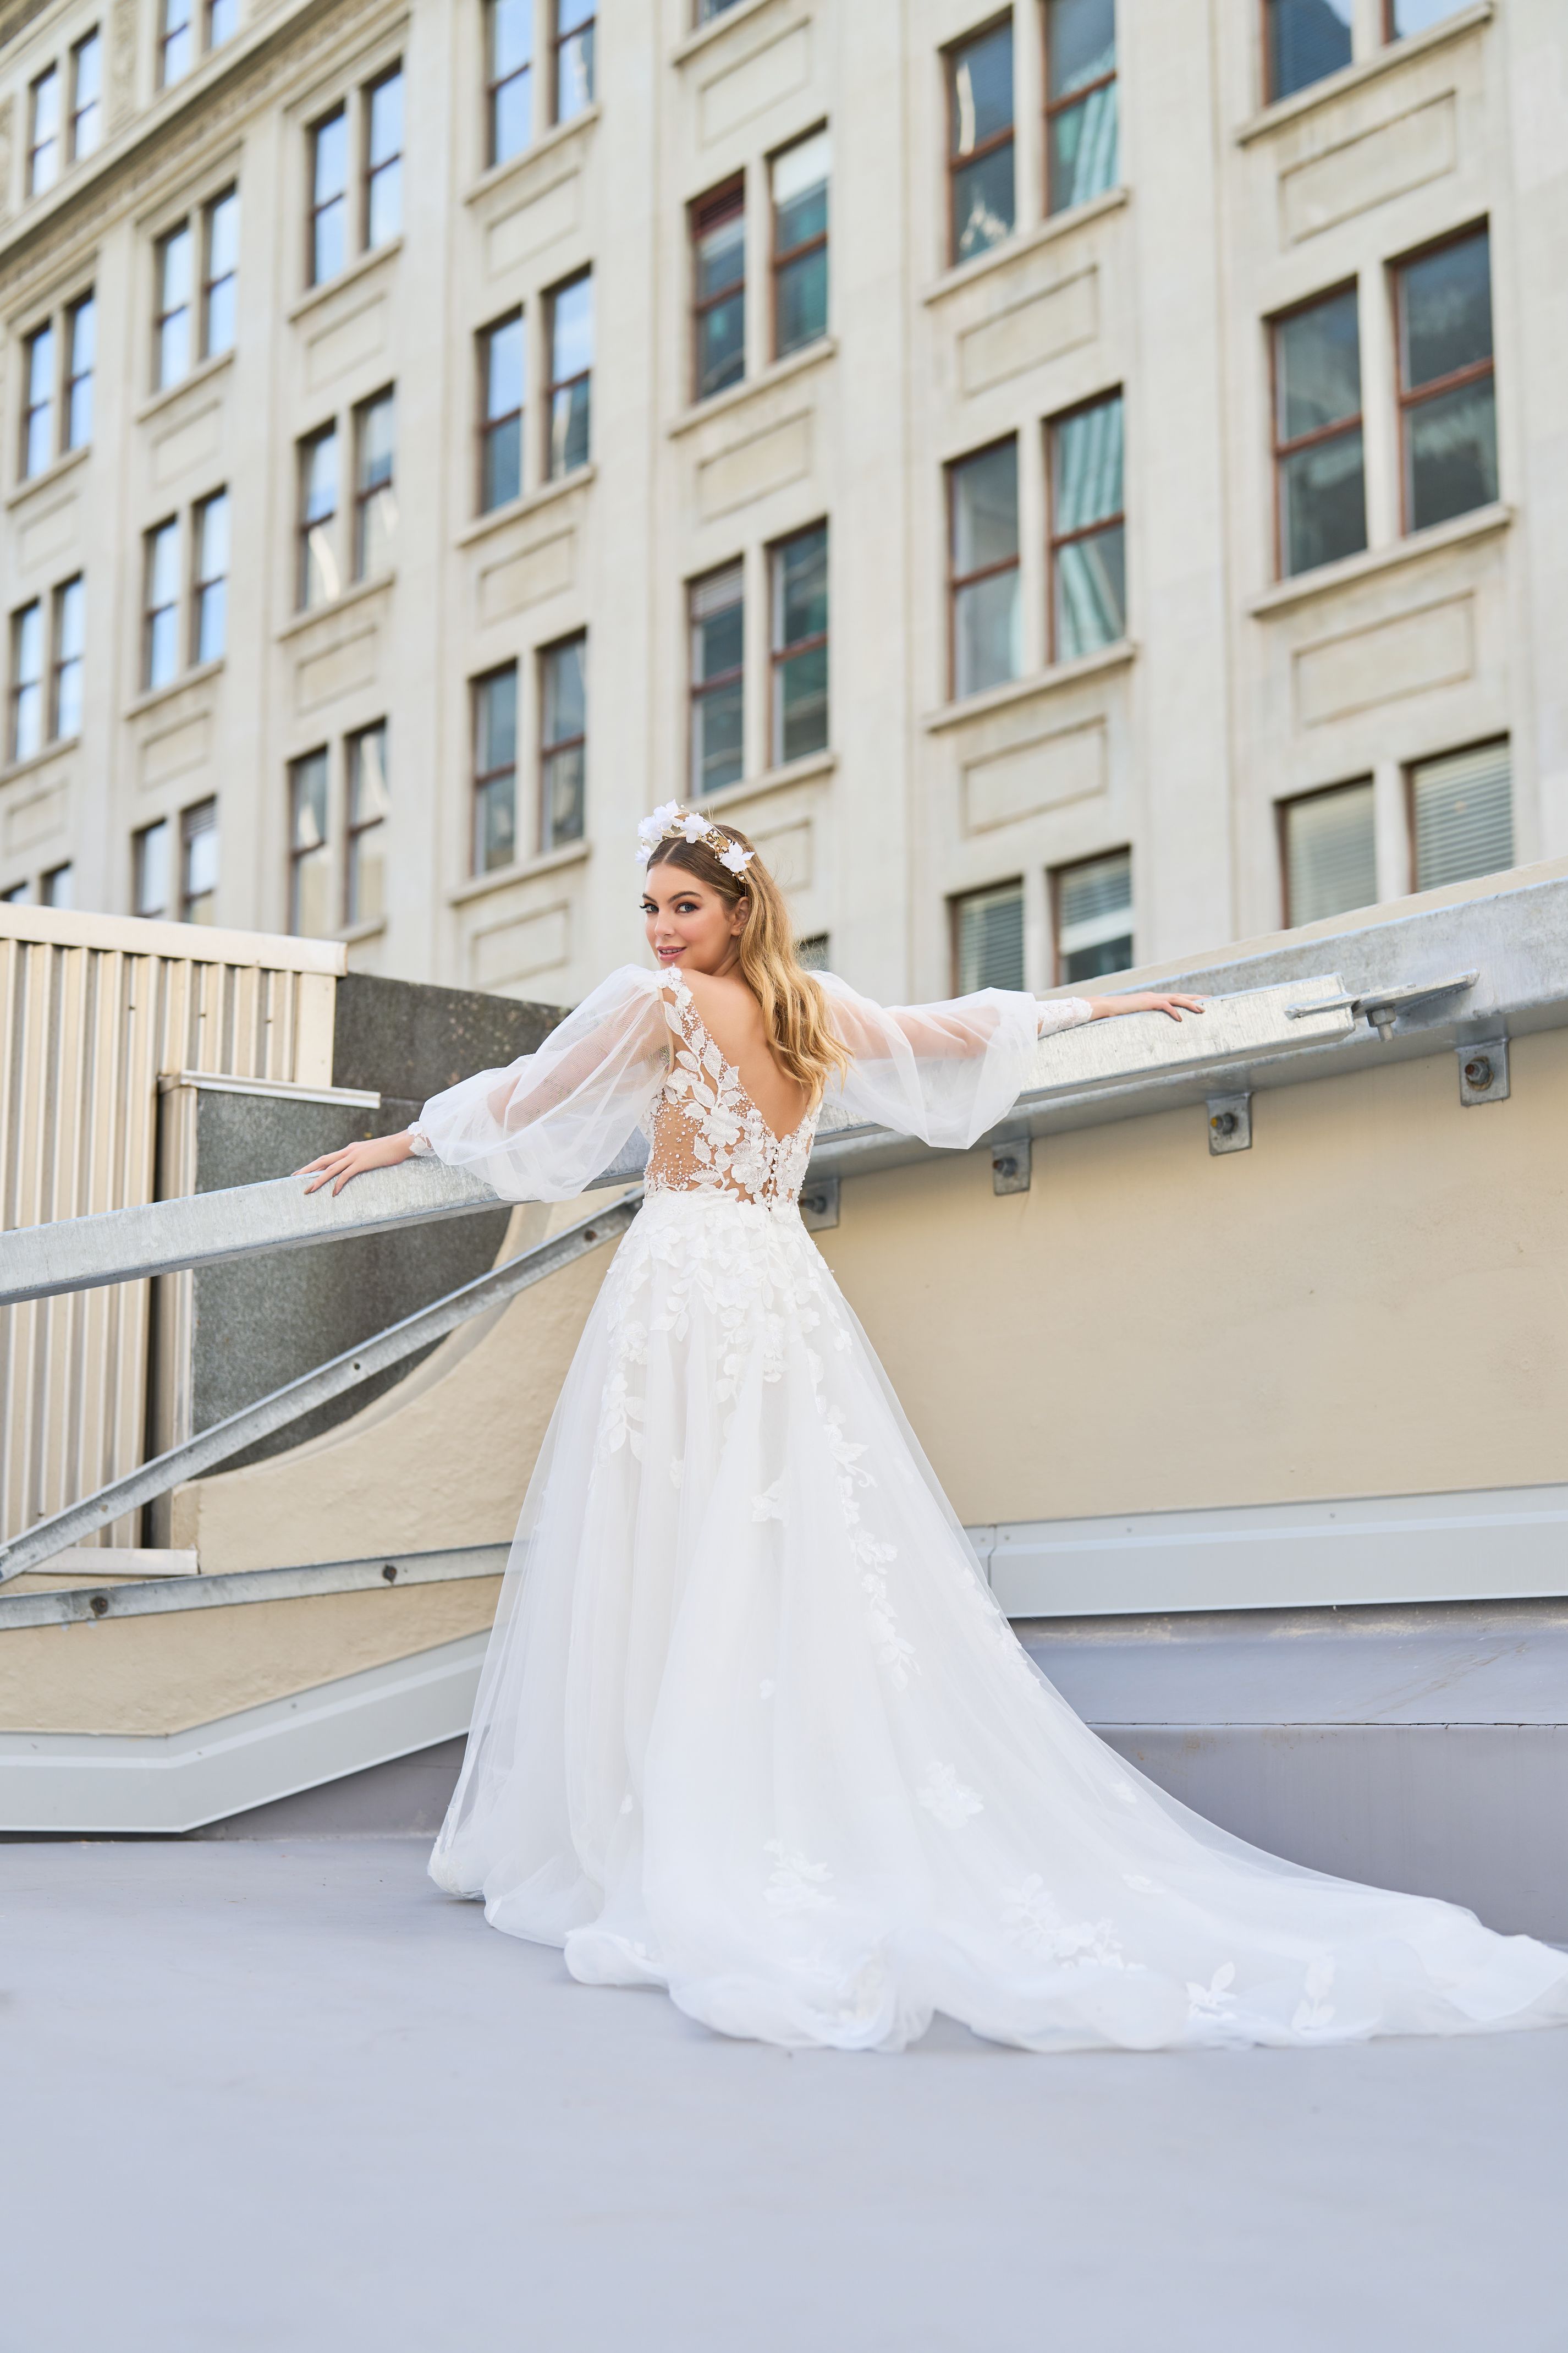 Wedding dress with floral detailing down plunging back and skirt. Sheer sleeves add a delicate touch. Plunging v-neckline and A-line silhouette create an elegant and romantic look that makes you appear to be floating down the aisle.